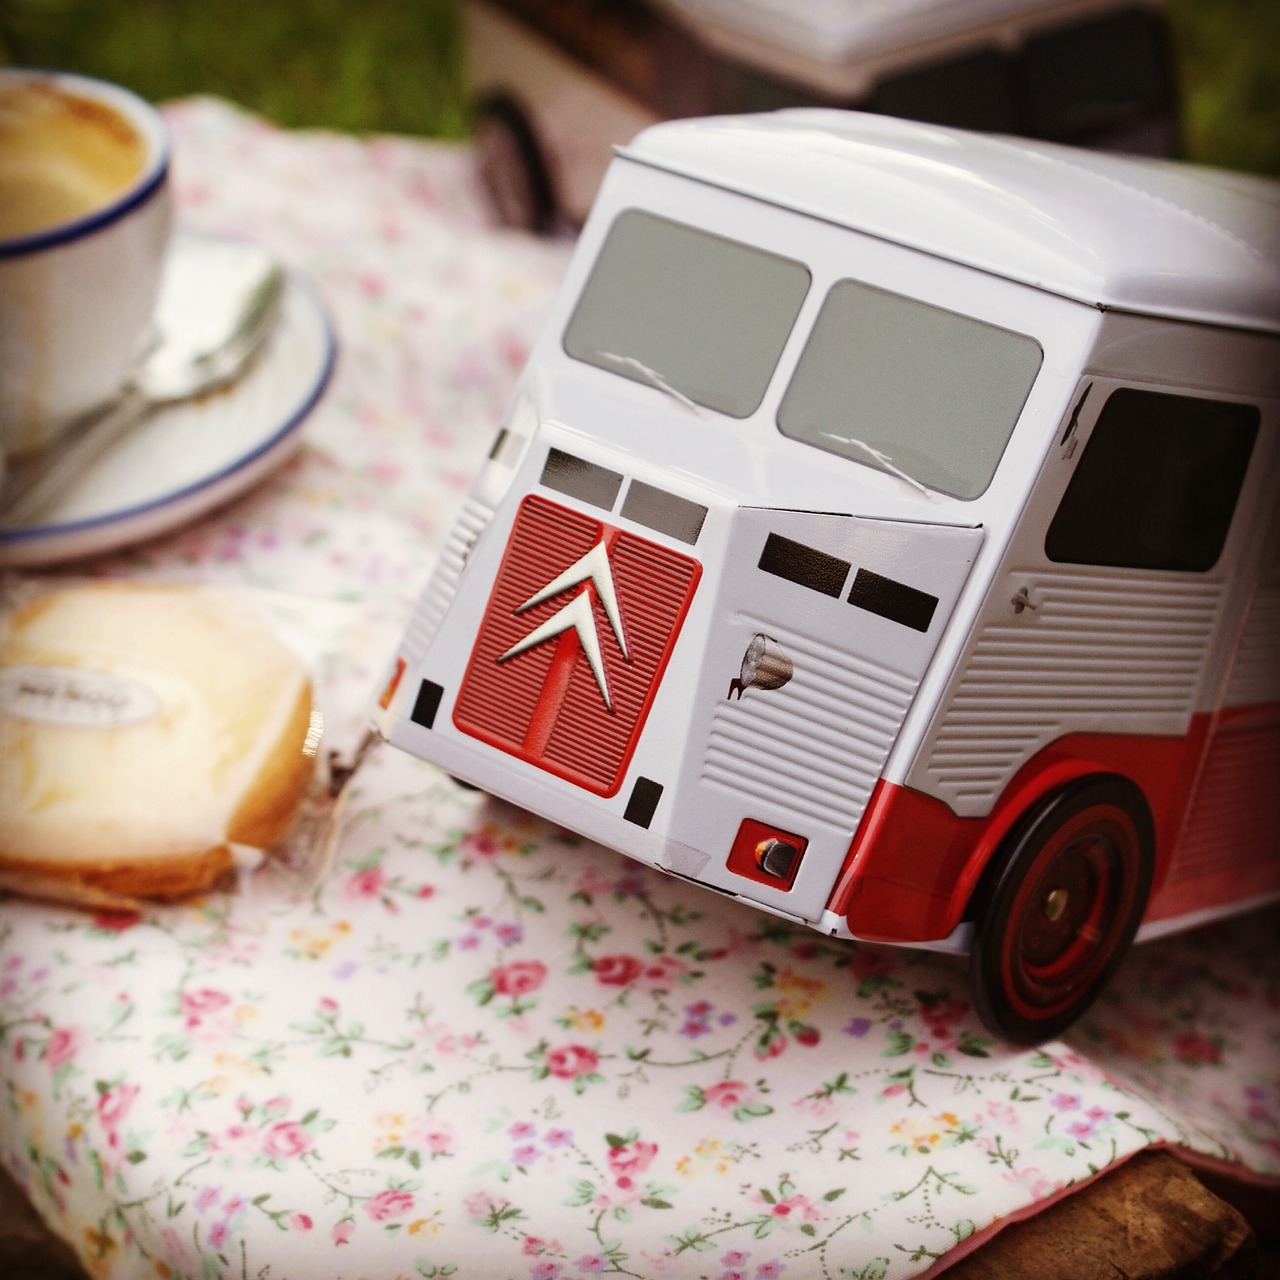 tea party biscuits breakfast free photo